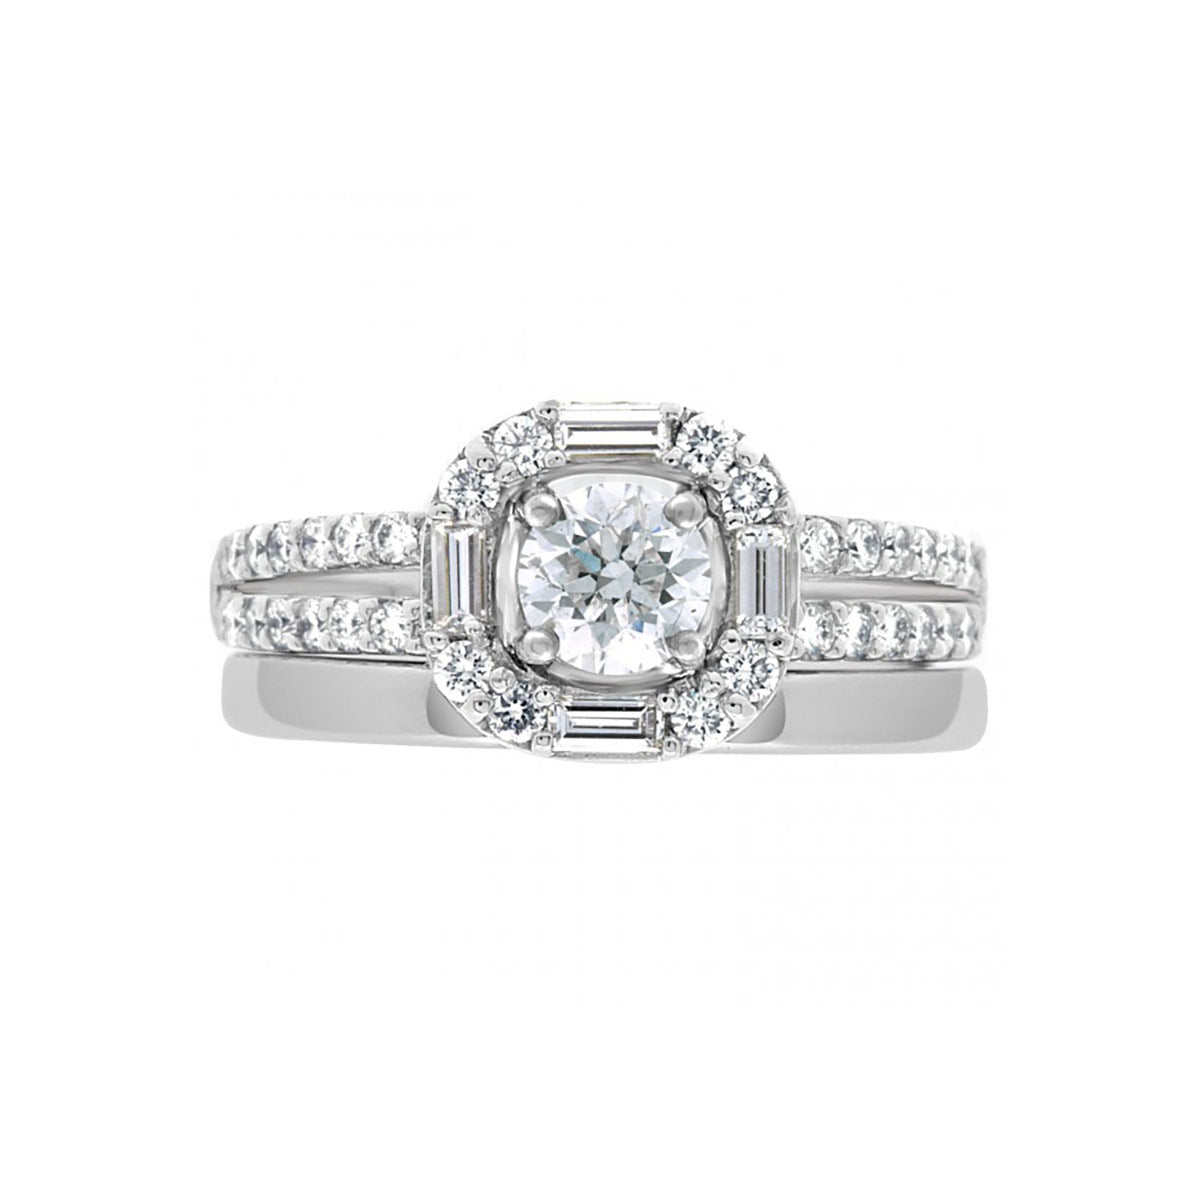 Baguette and Round Diamond Engagement Ring in white gold pictured with a wedding ring